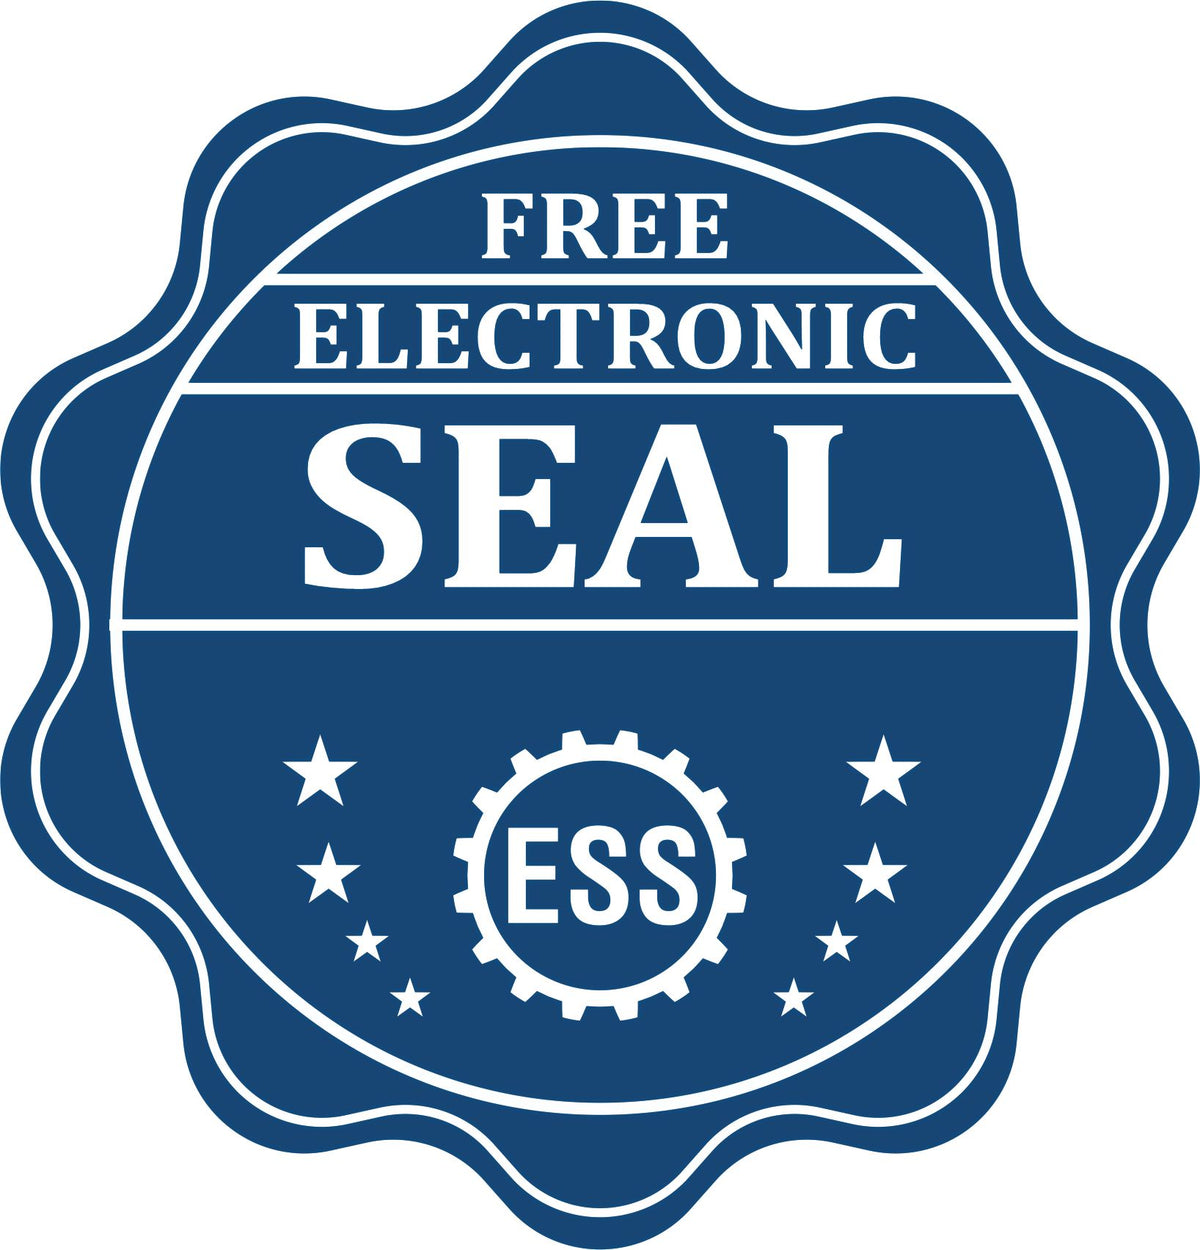 A badge showing a free electronic seal for the MaxLight Premium Pre-Inked California State Seal Notarial Stamp with stars and the ESS gear on the emblem.